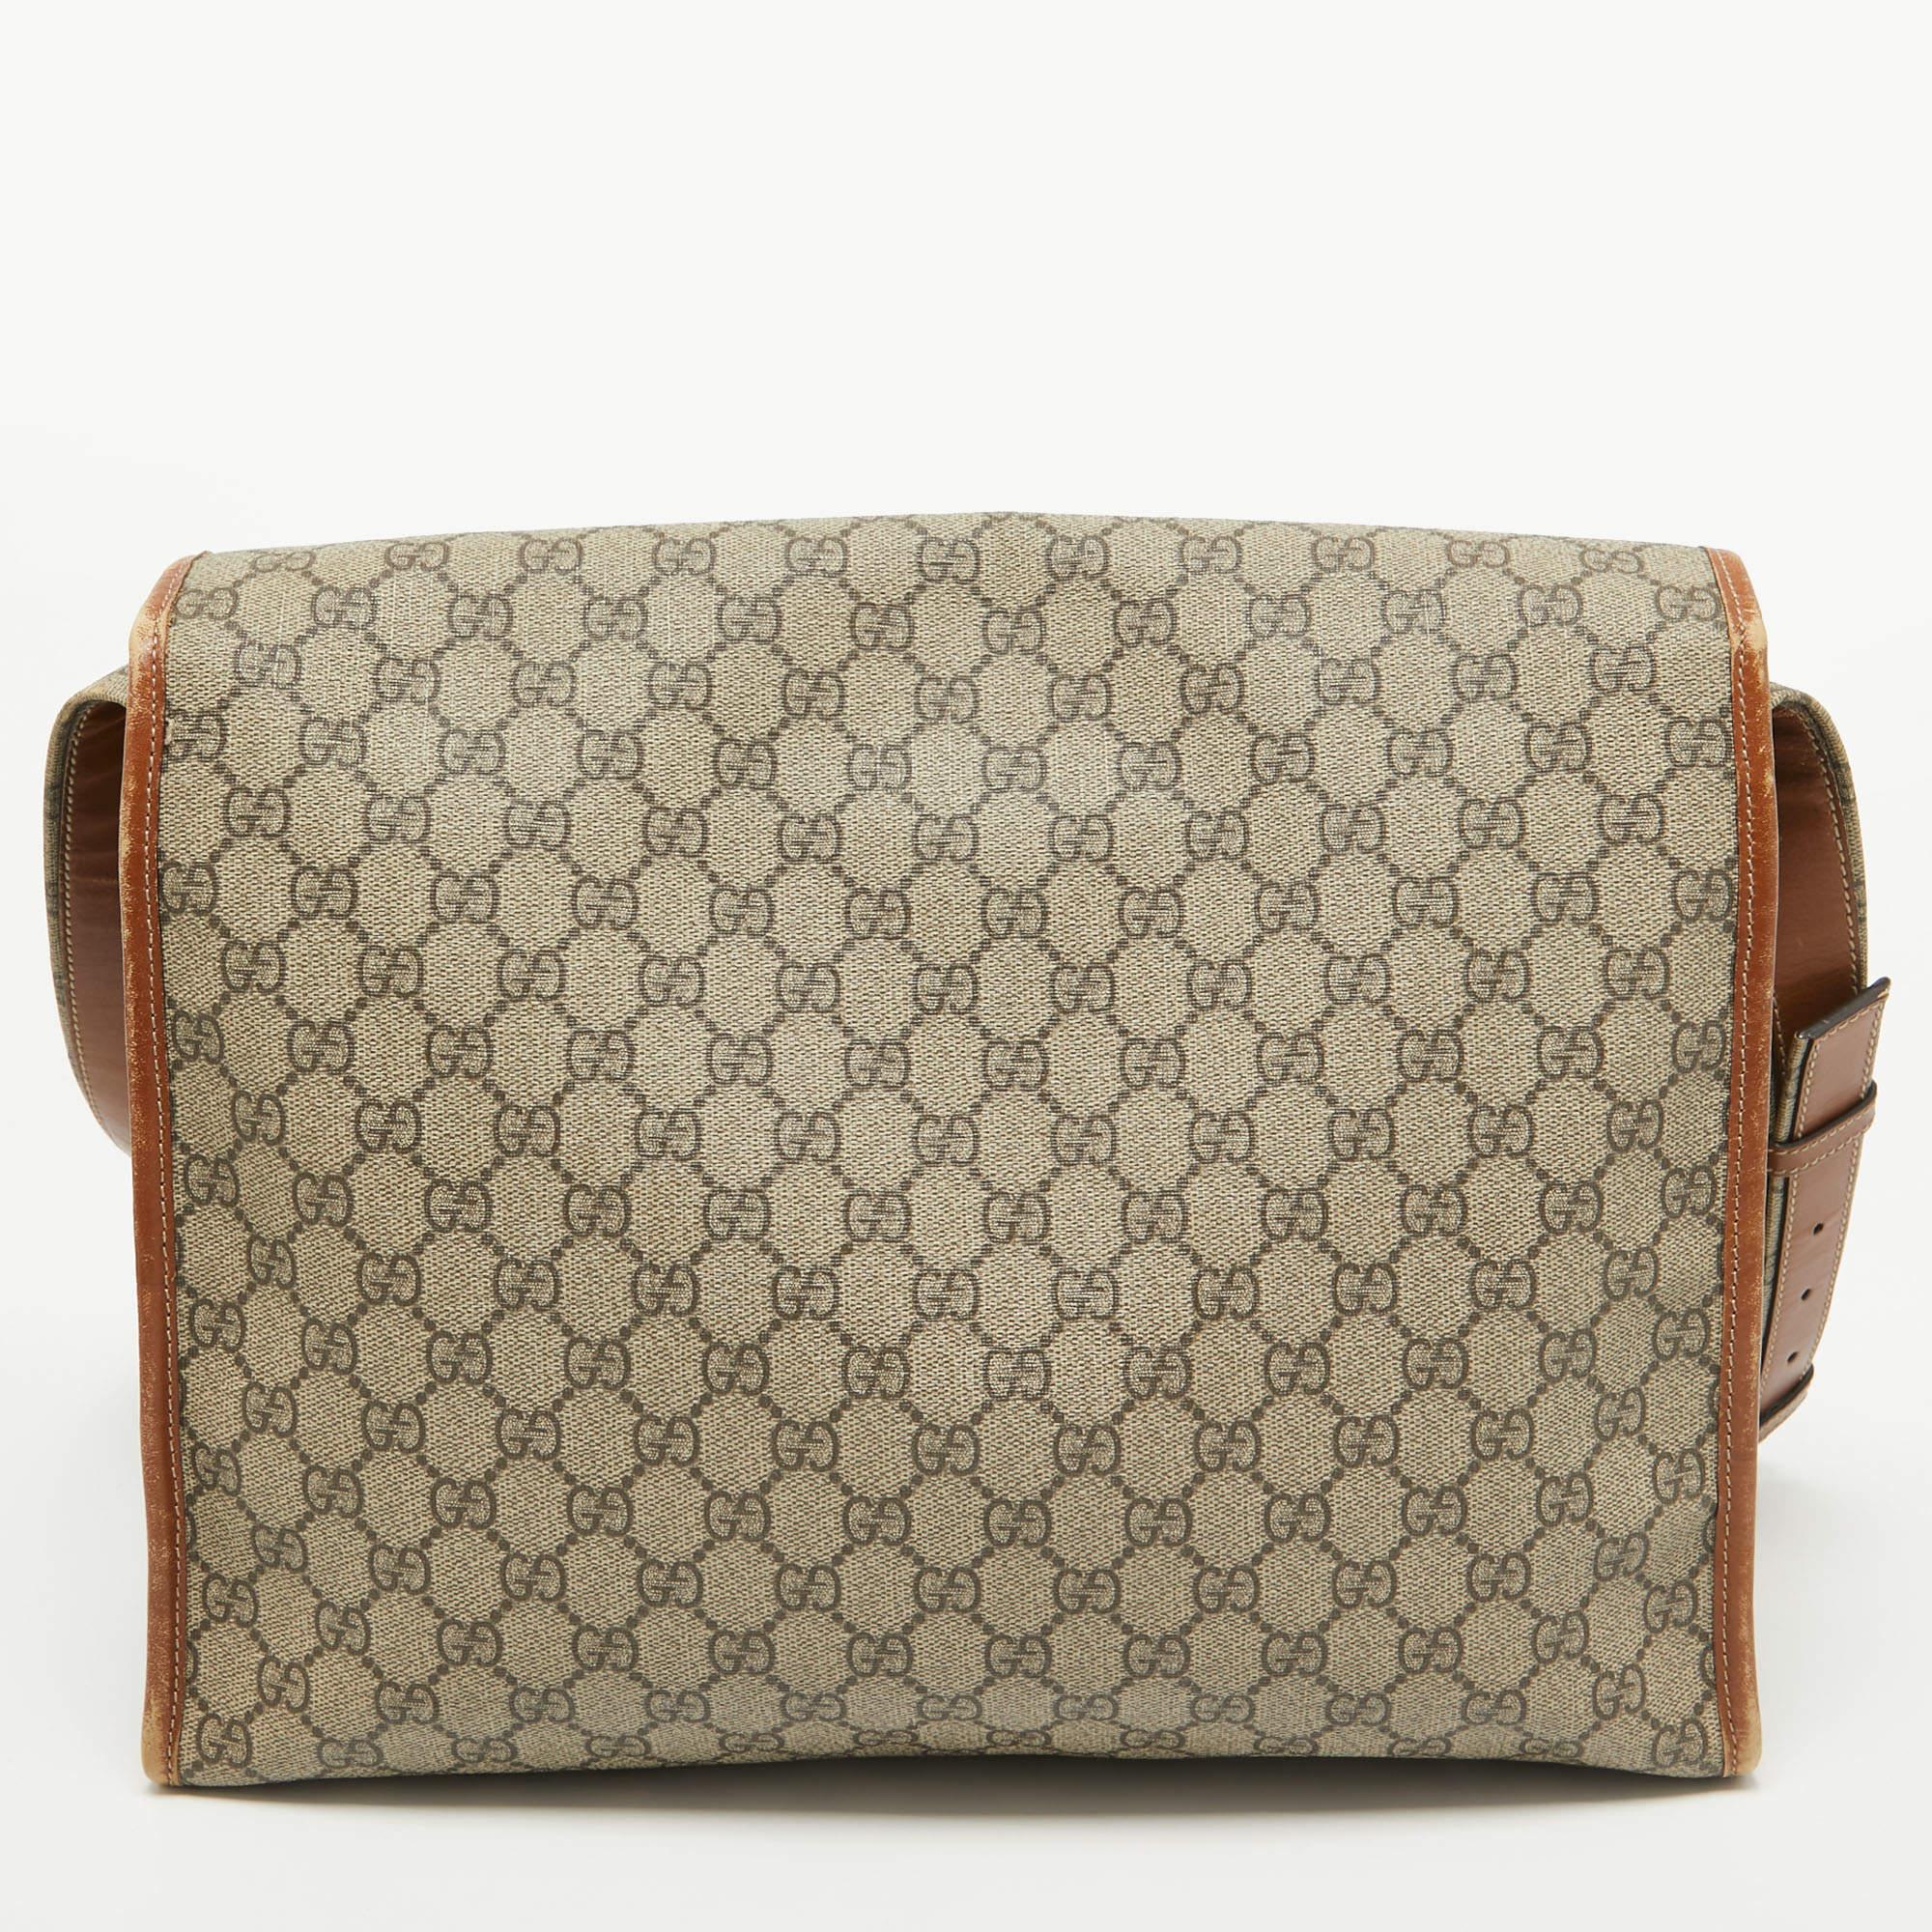 Gucci Beige/Brown GG Supreme Canvas And Leather Messenger Bag 25